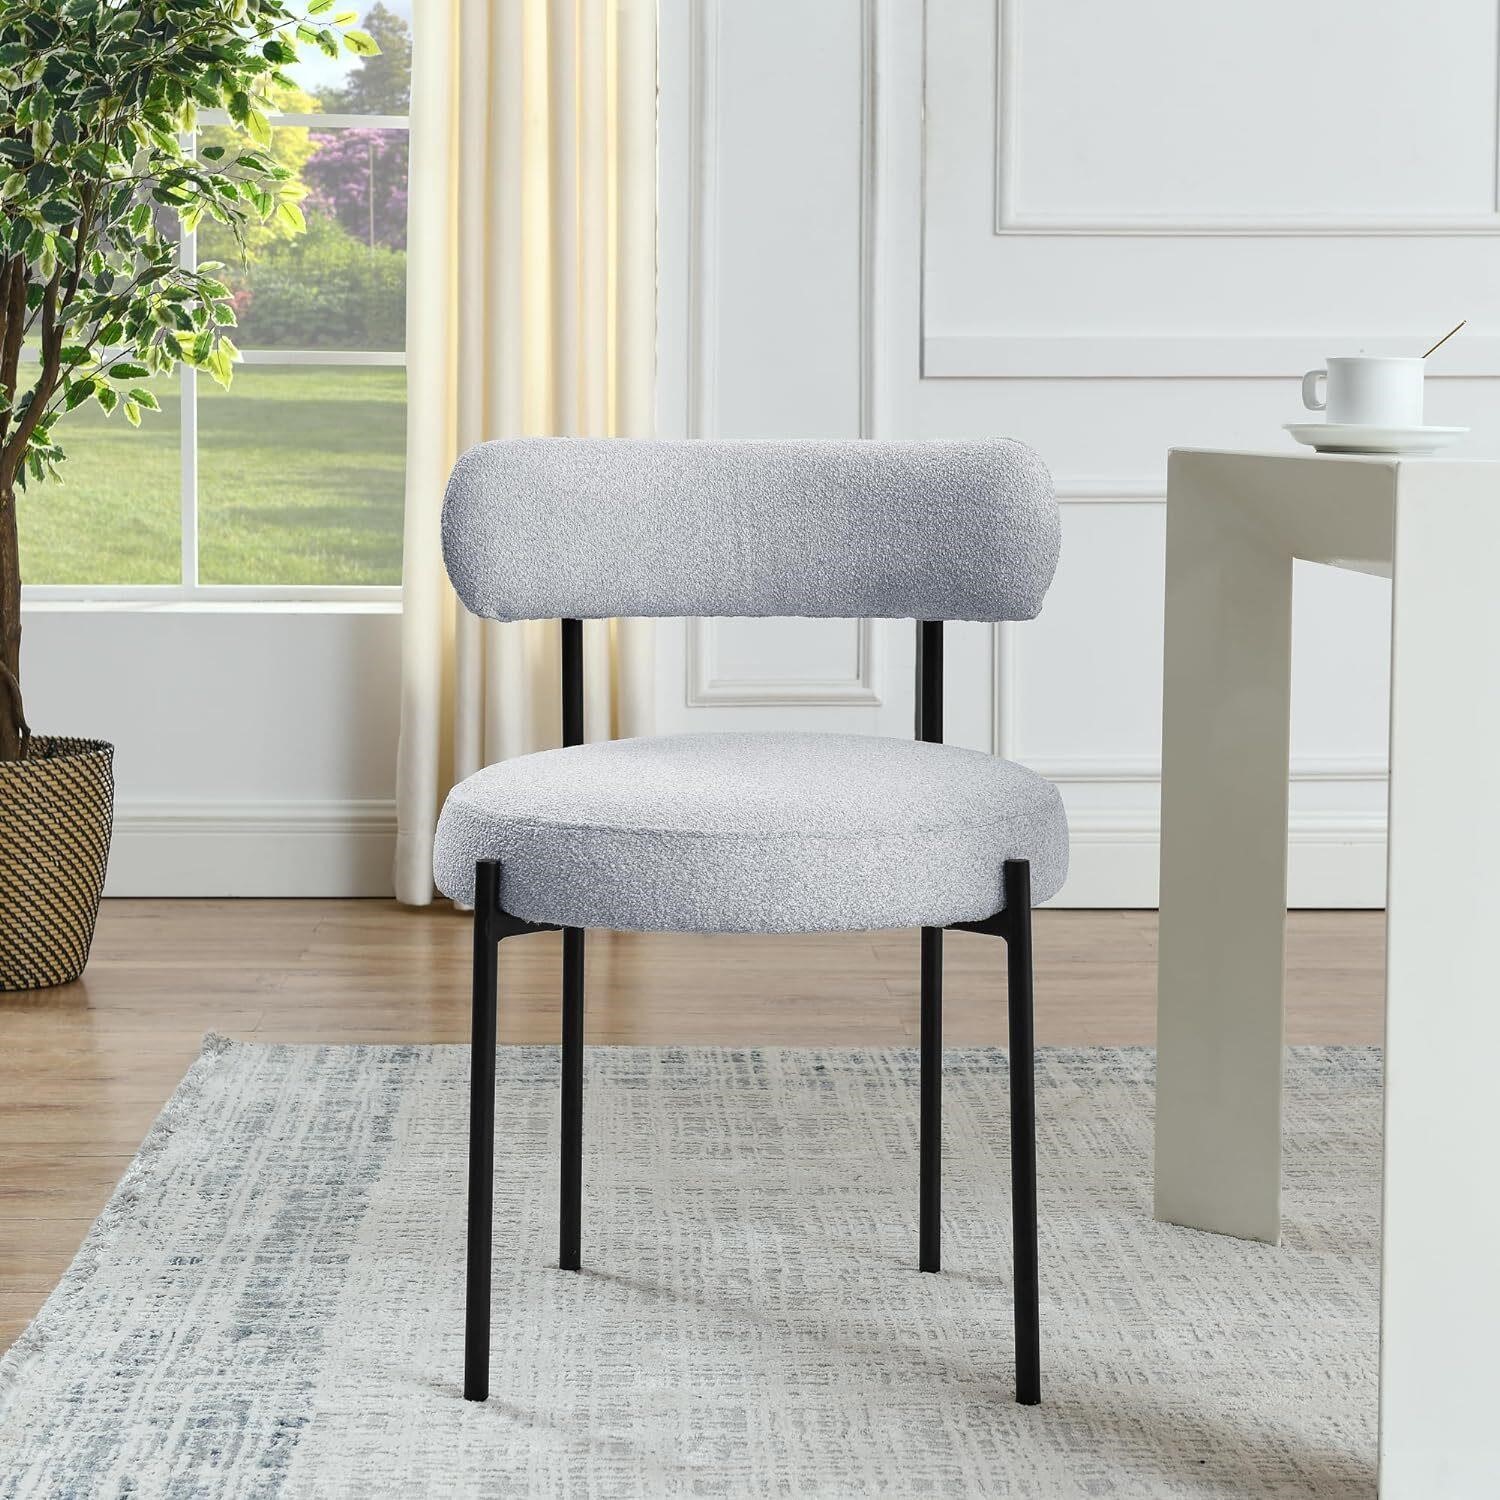 TEFUNE Armless Chairs, Upholstered, Grey